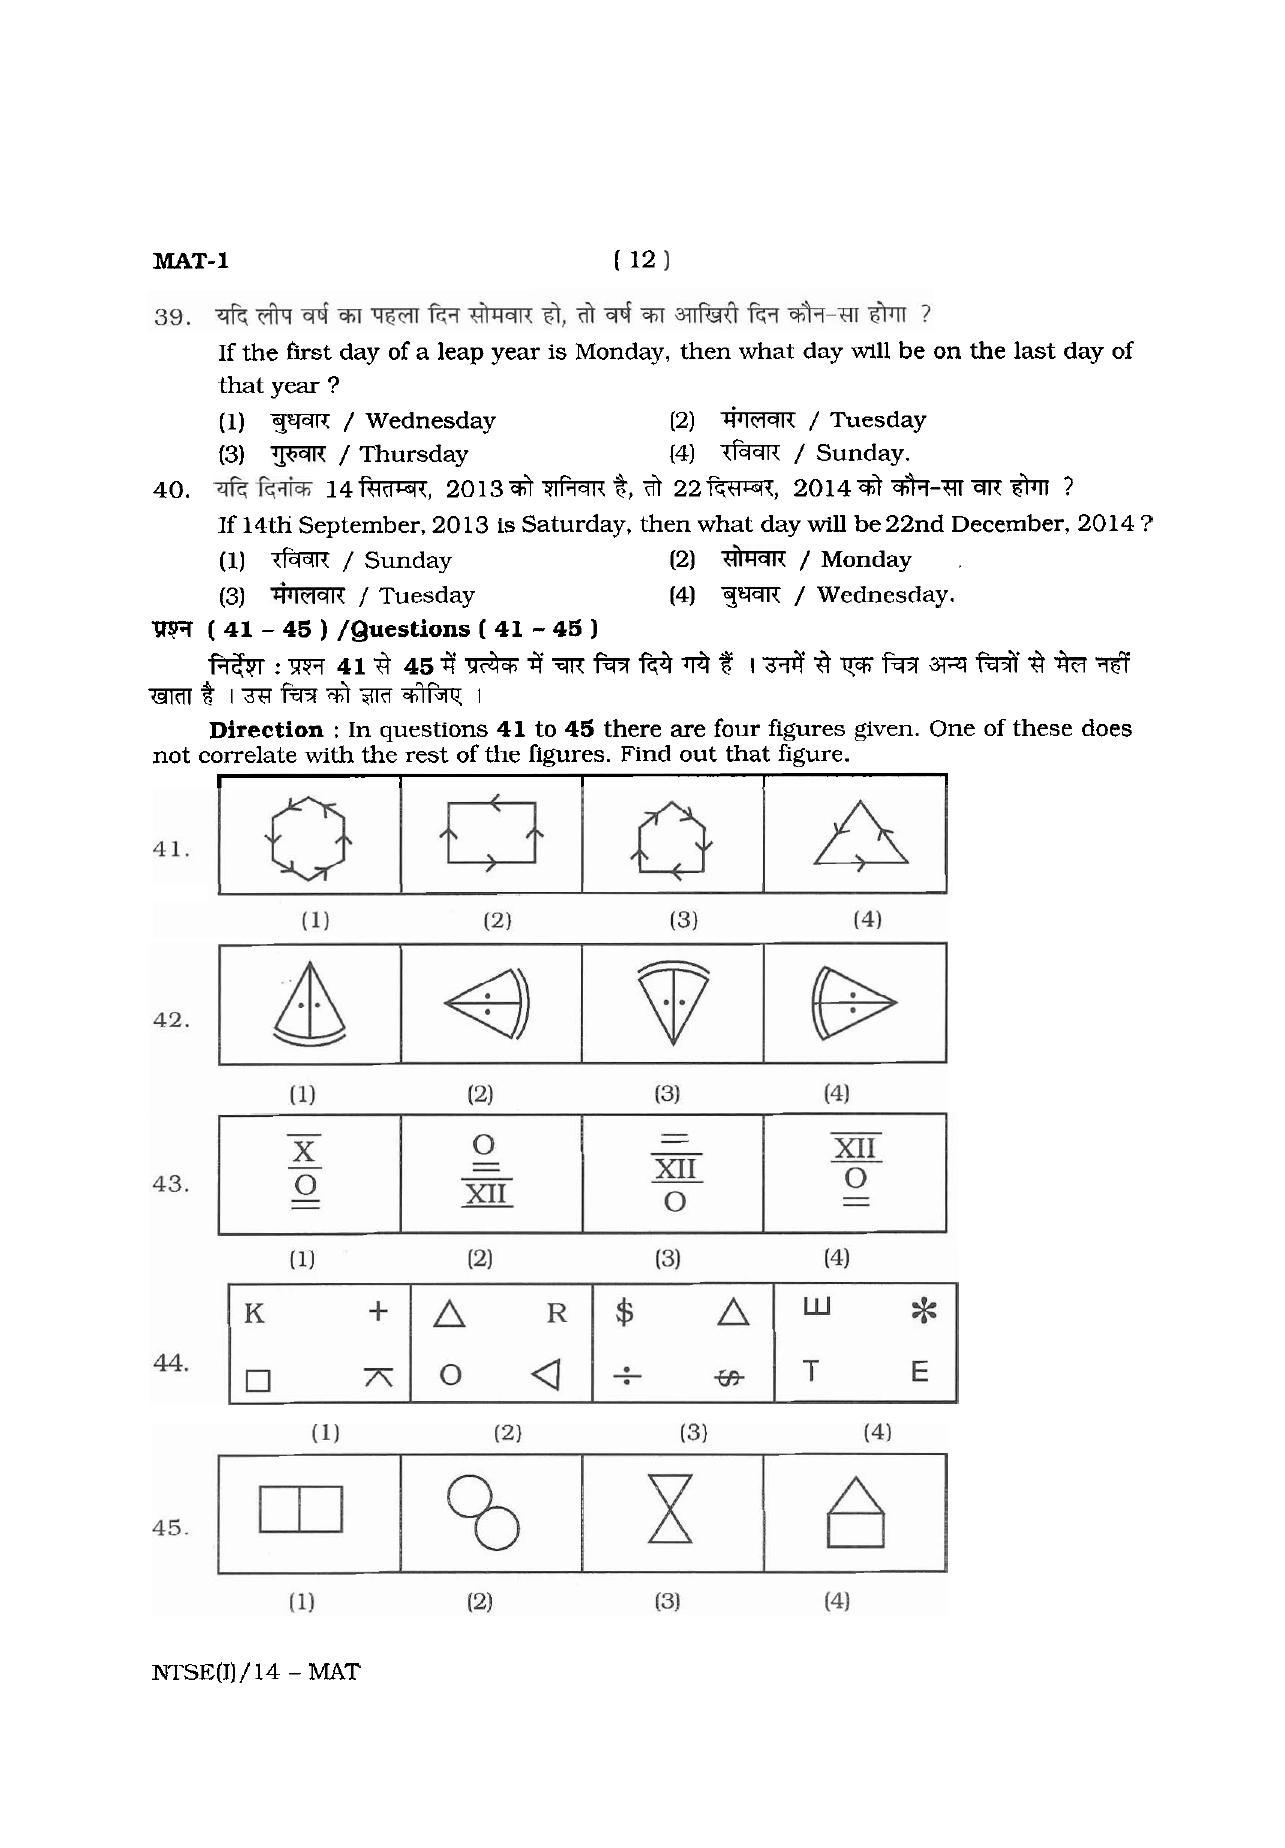 NTSE 2014 (Stage II) MAT Question Paper - Page 12